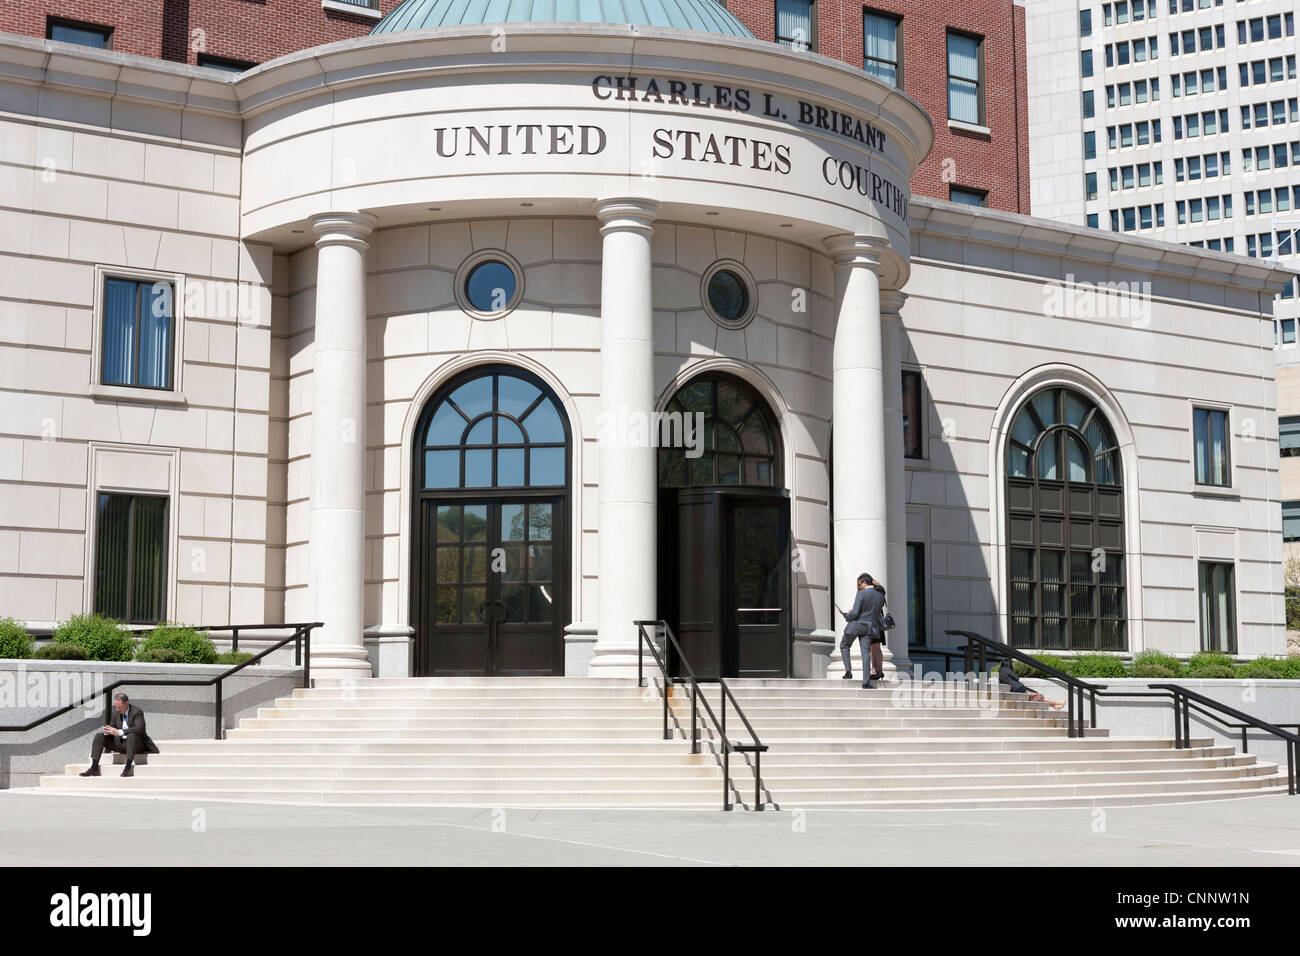 The Charles L. Brieant United States Federal Building and Courthouse (Southern District of New York) in White Plains, New York. Stock Photo